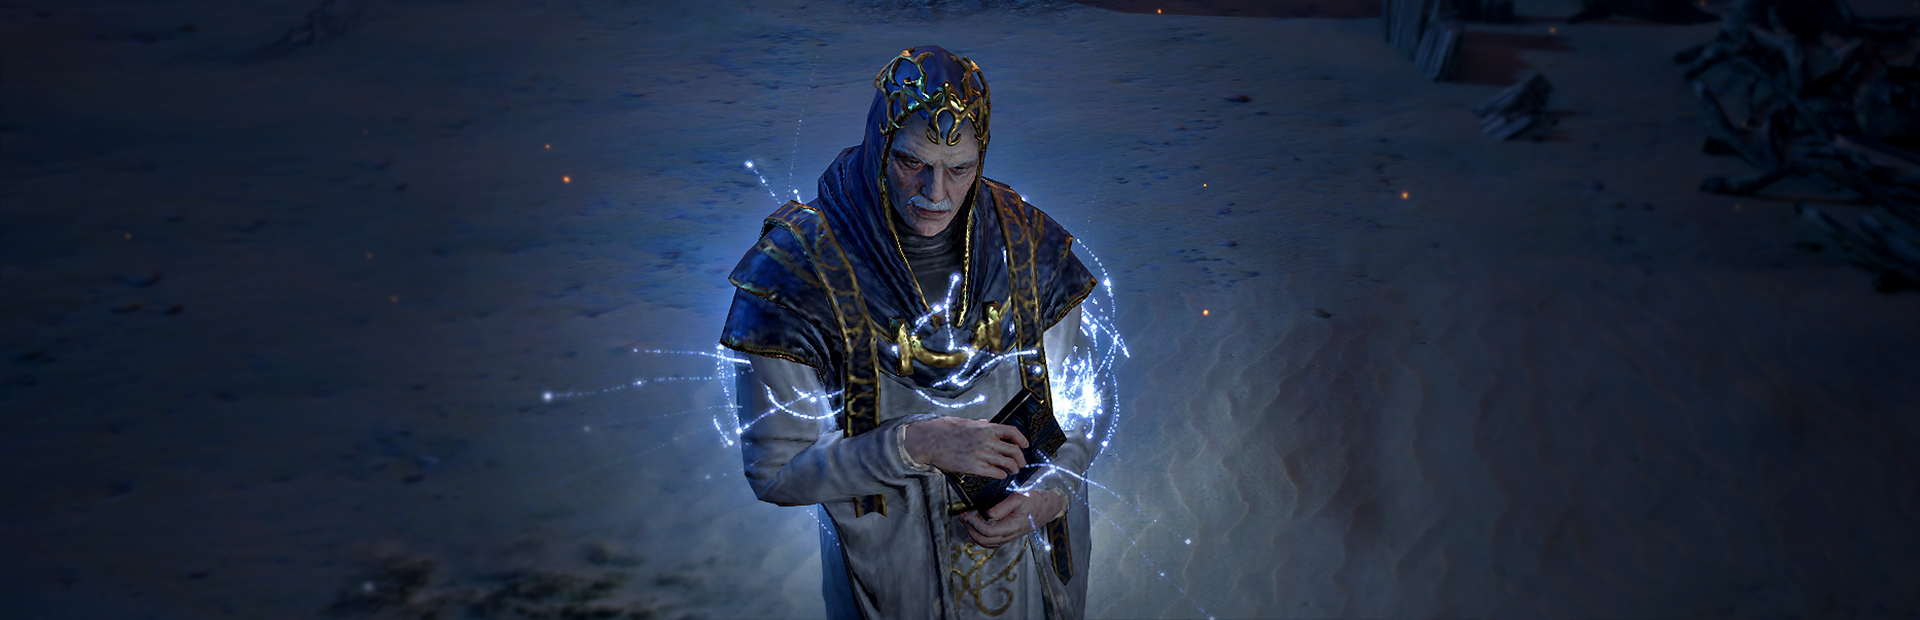 2019] Path of Exile: Synthesis FAQ, Path of Exile Dev Tracker